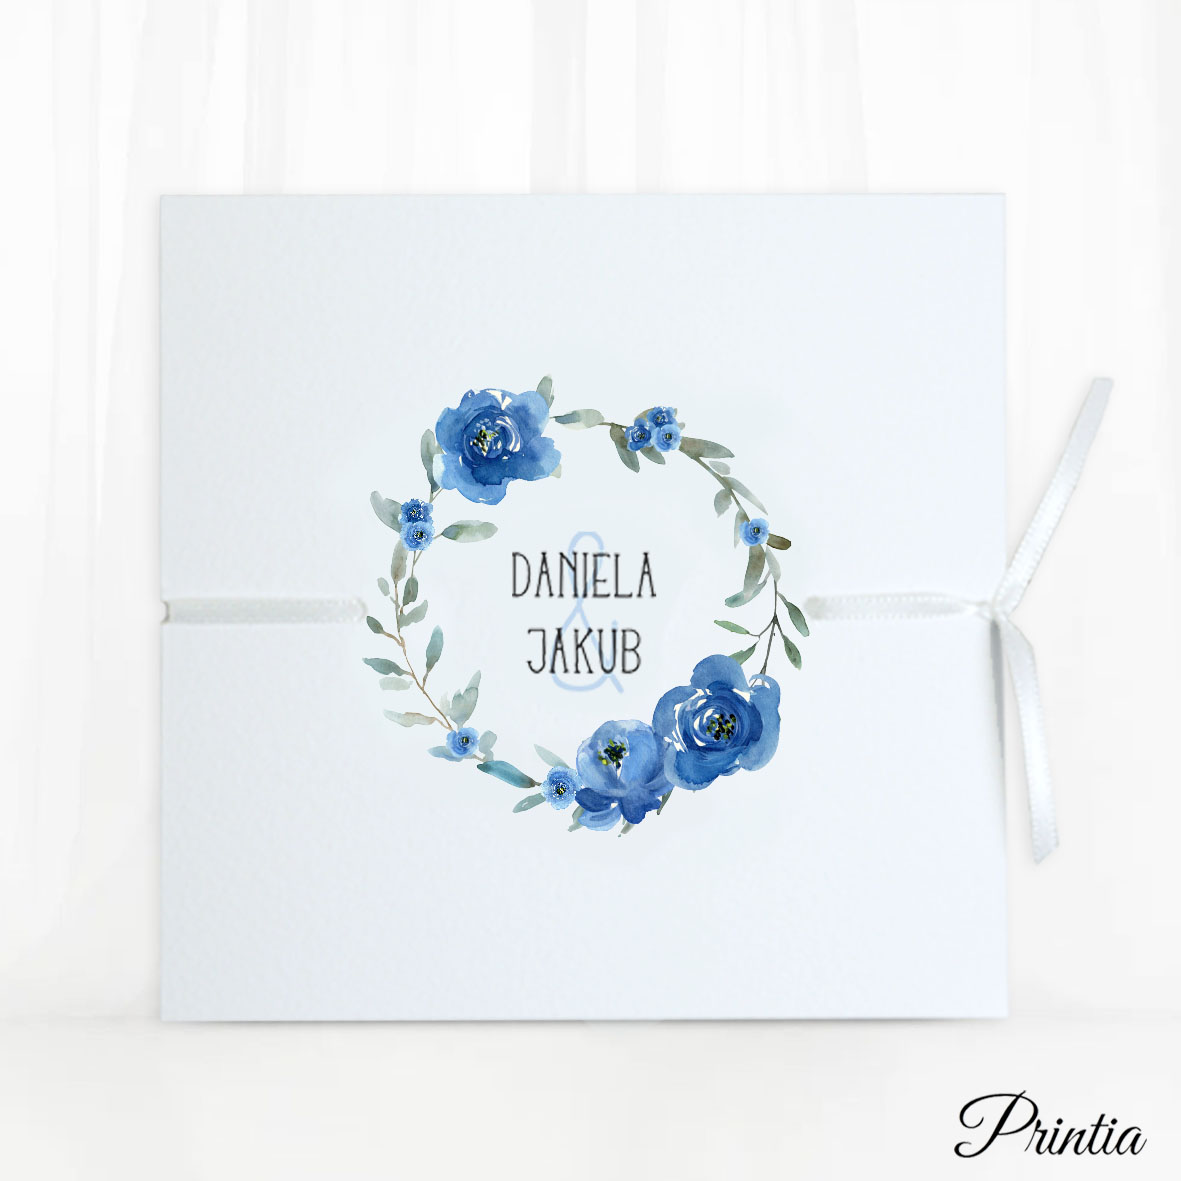 Opening wedding invitation with blue floral circle and ribbon